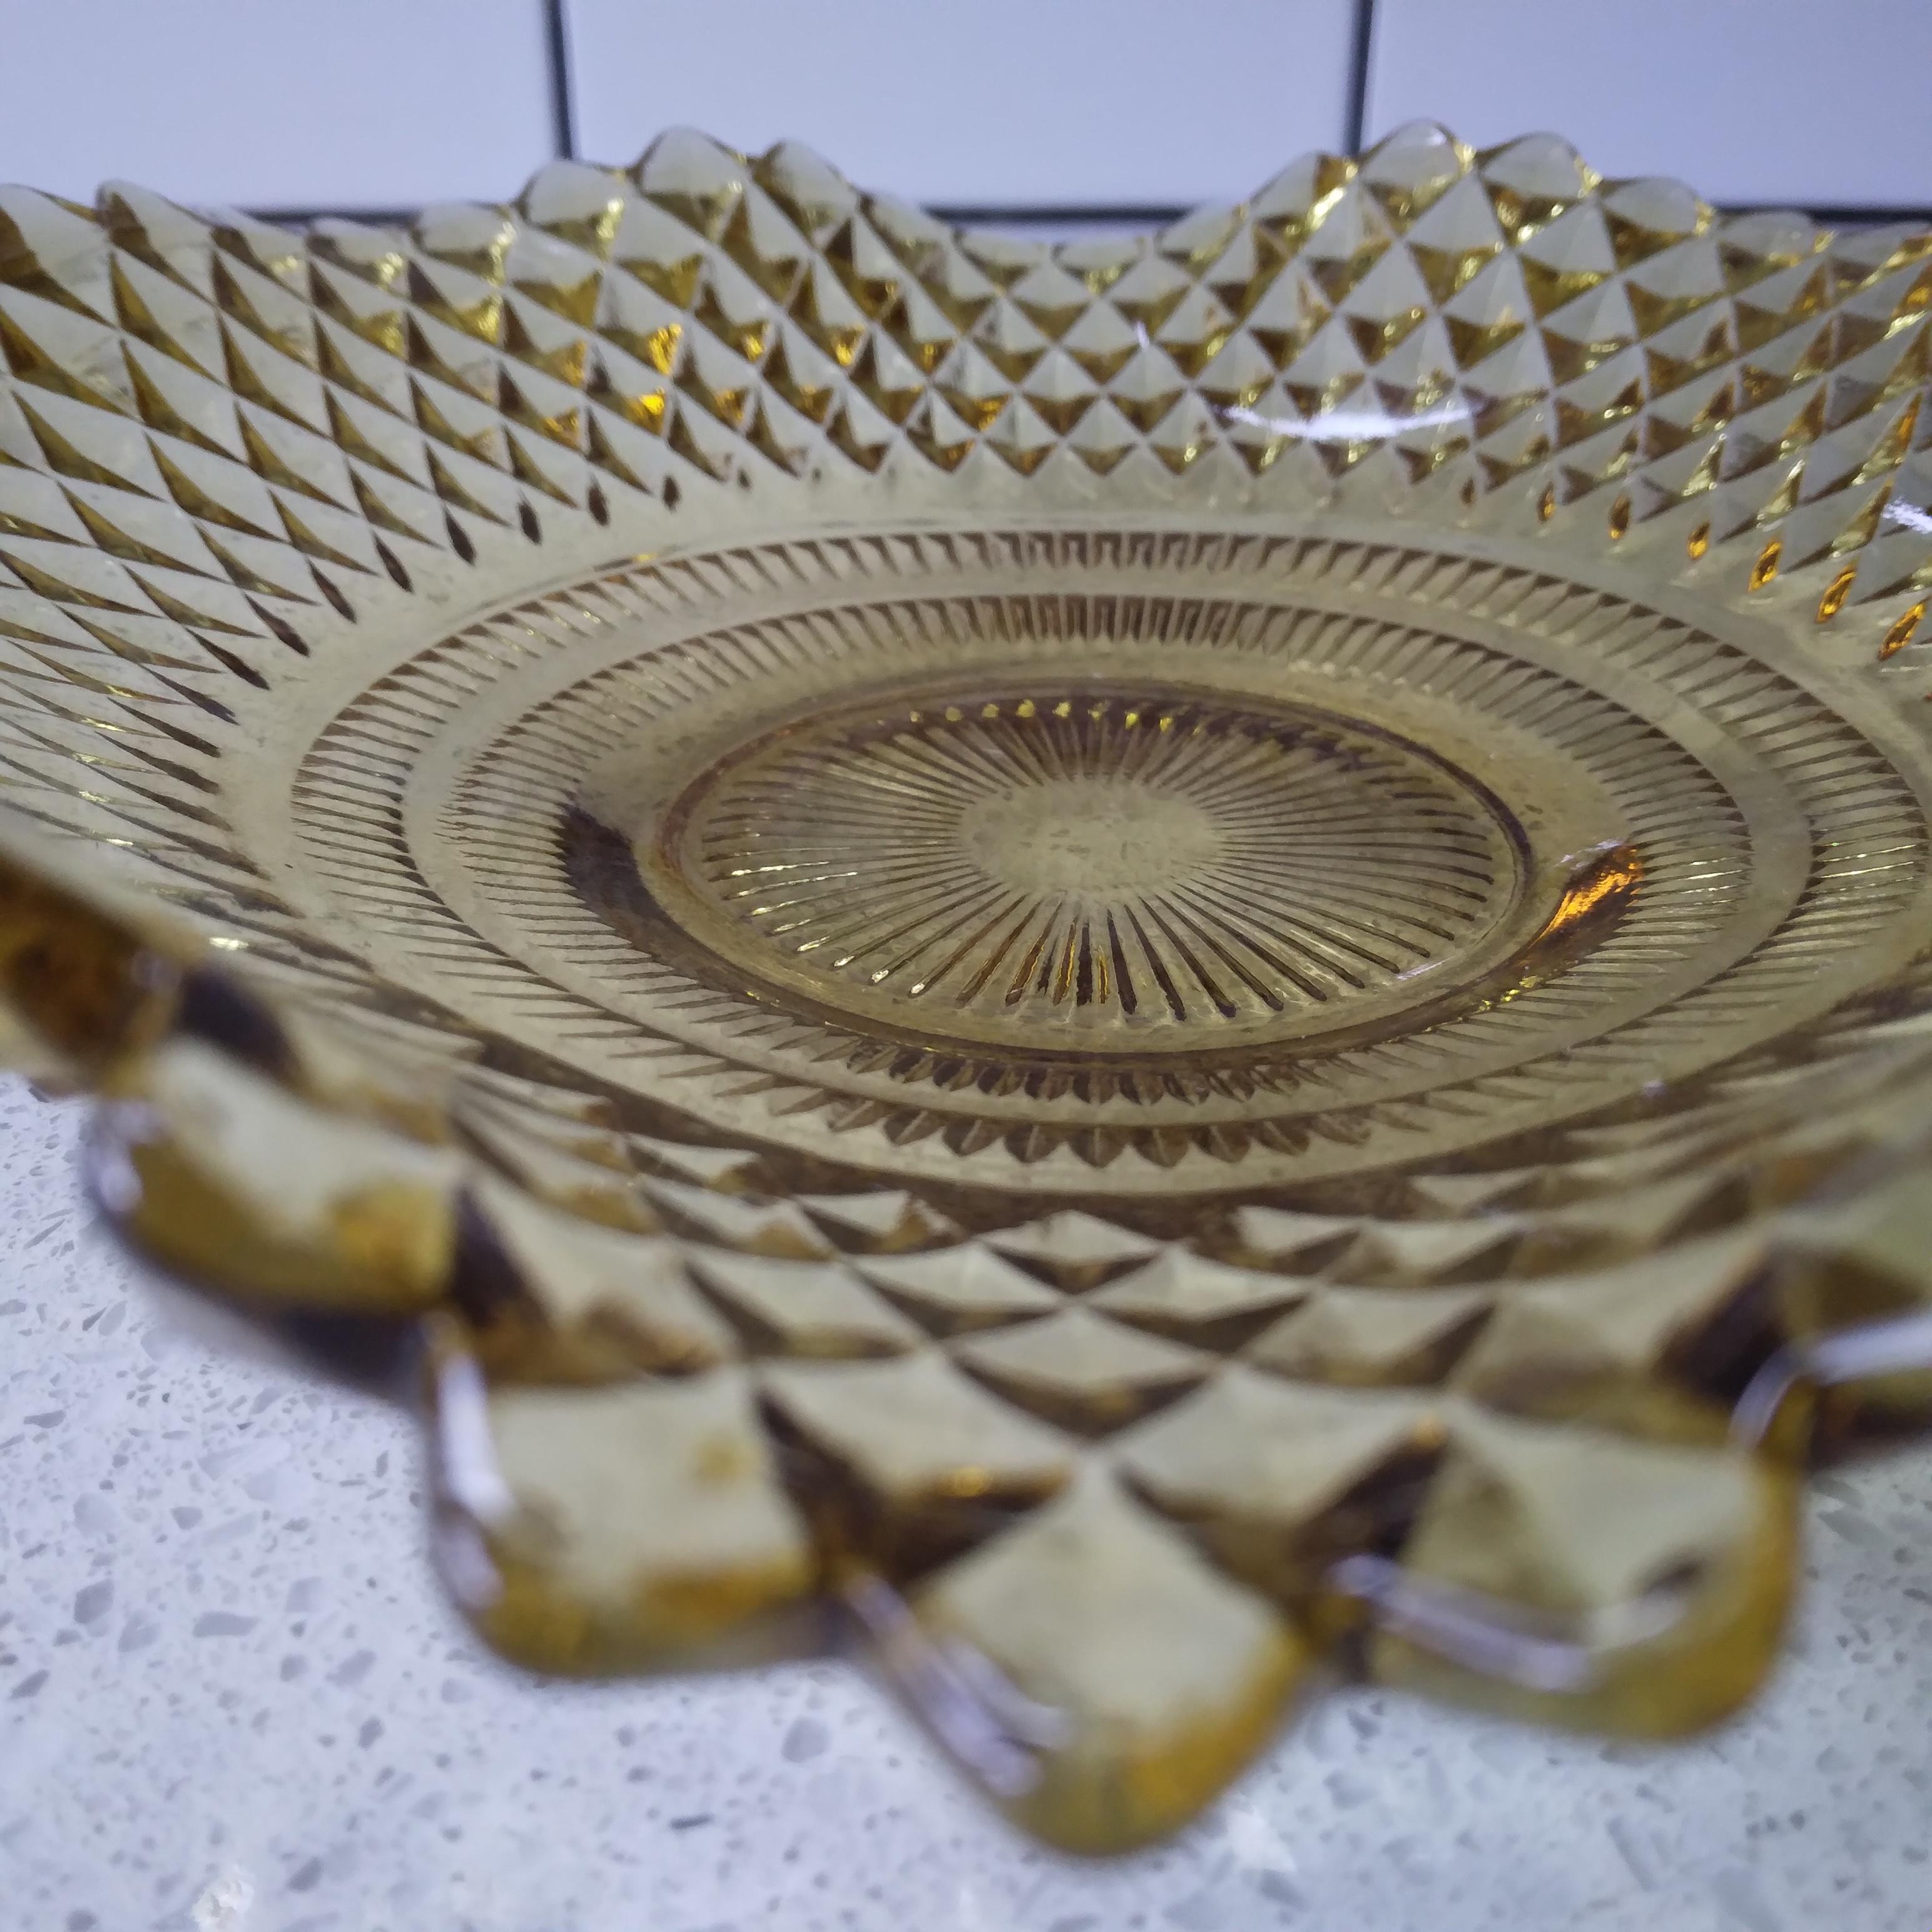 Wavy and translucent... this gorgeous ruffled edge glass platter is simply beautiful. We love the vintage golden amber hue... very retro and warm. The  diamond pattern catches the light perfectly. The thick walled glass is in excellent condition for